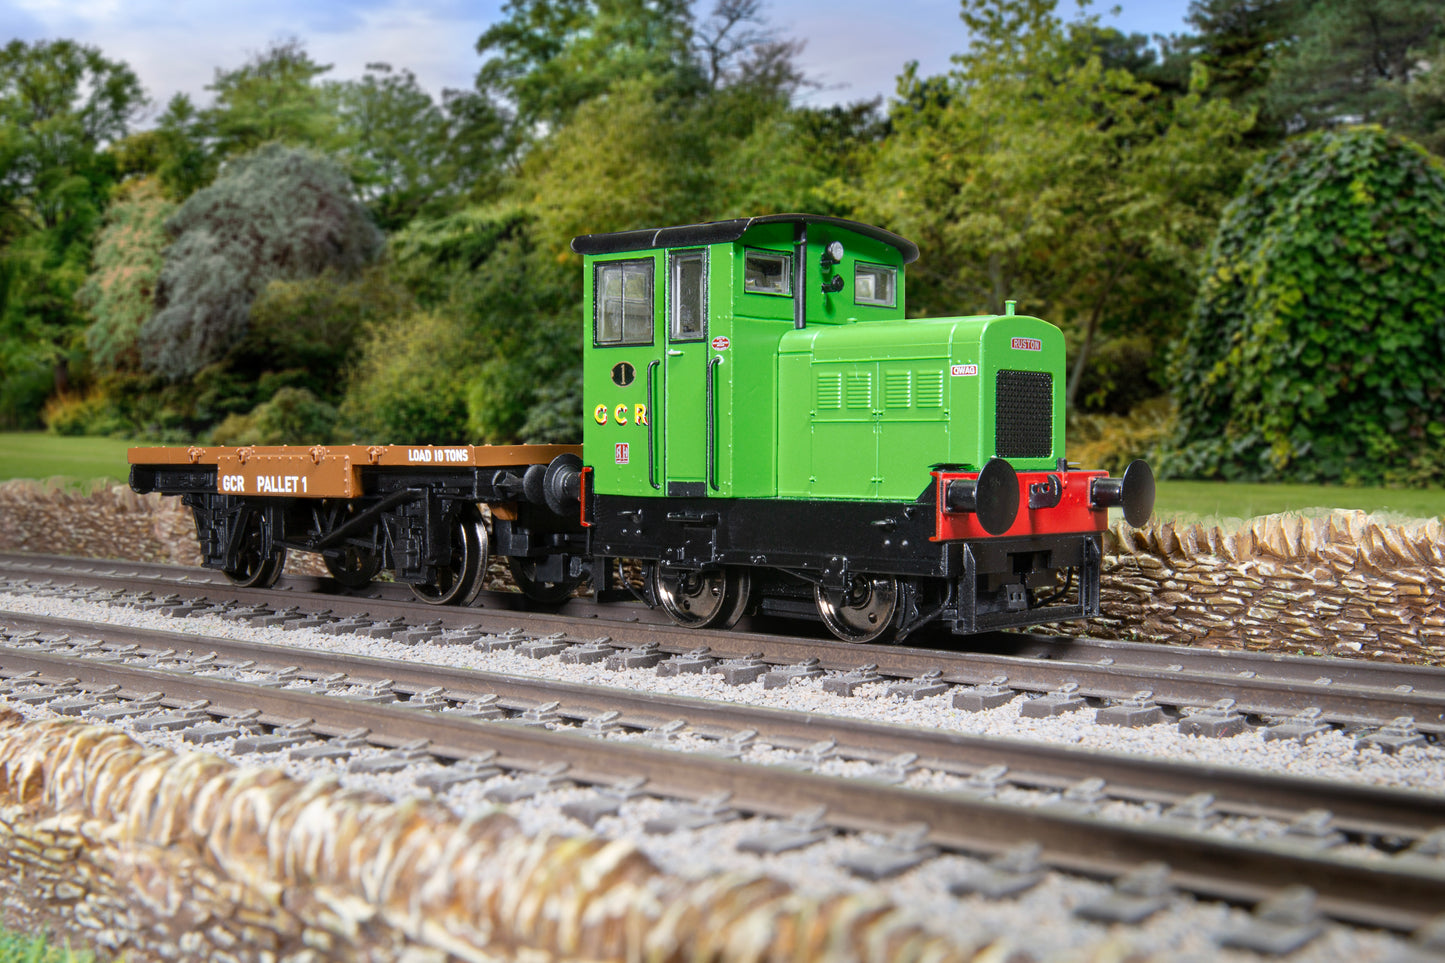 Hornby R30012 - GCR Ruston & Hornsby 48DS 0-4-0 & Flatbed Wagon 'Qwag' No. 1